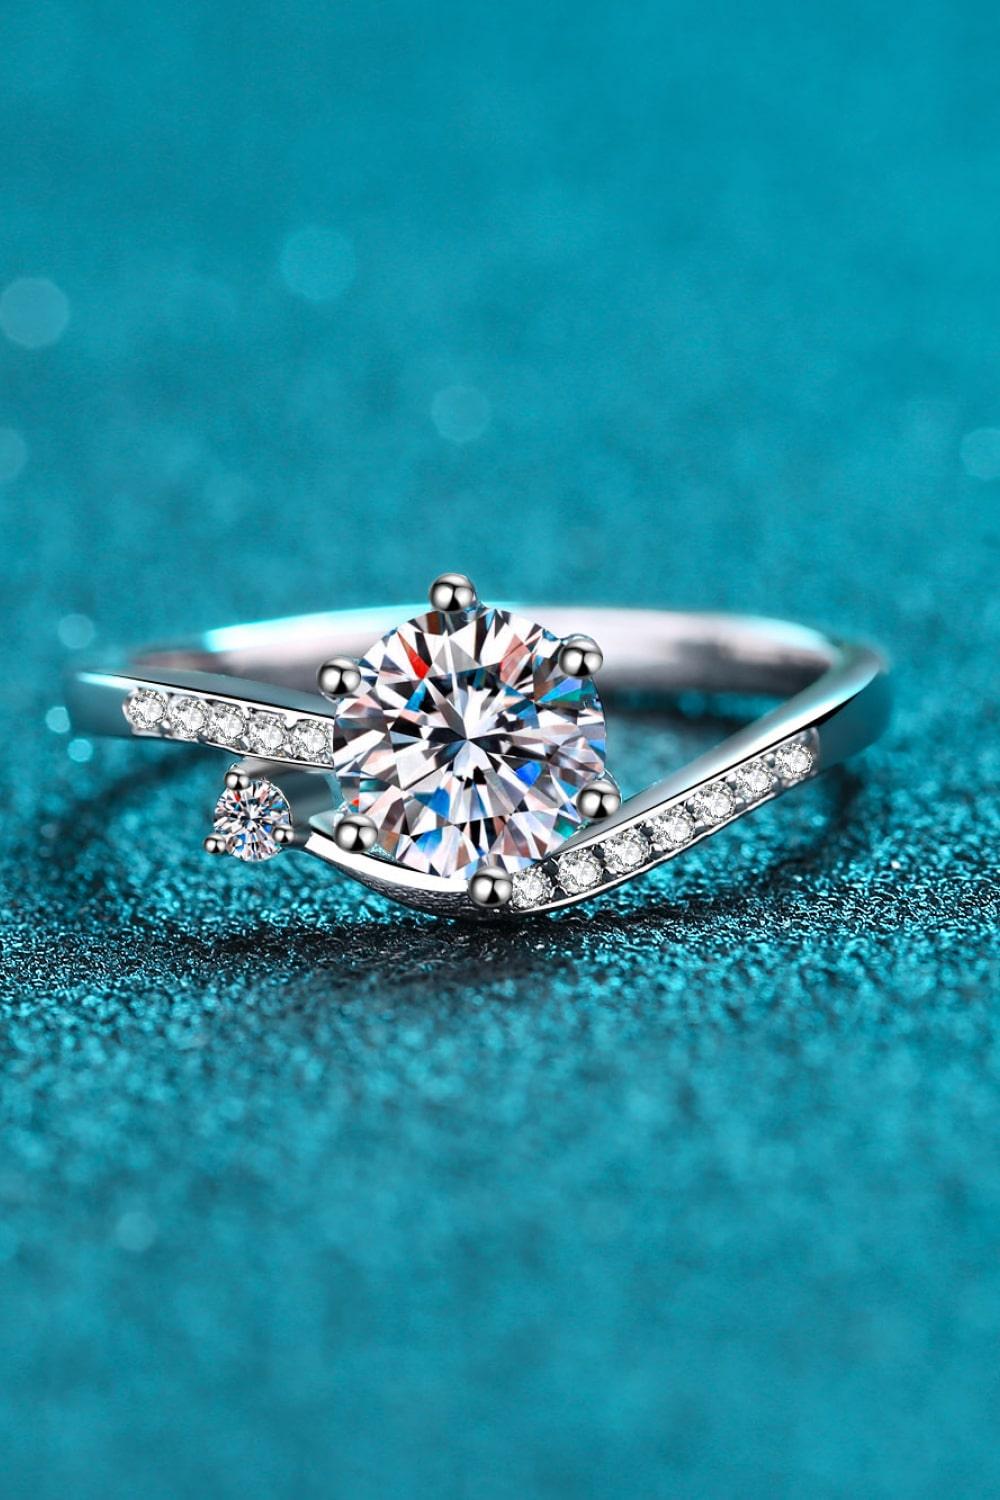 On My Mind 925 Sterling Silver Moissanite Ring - Flyclothing LLC